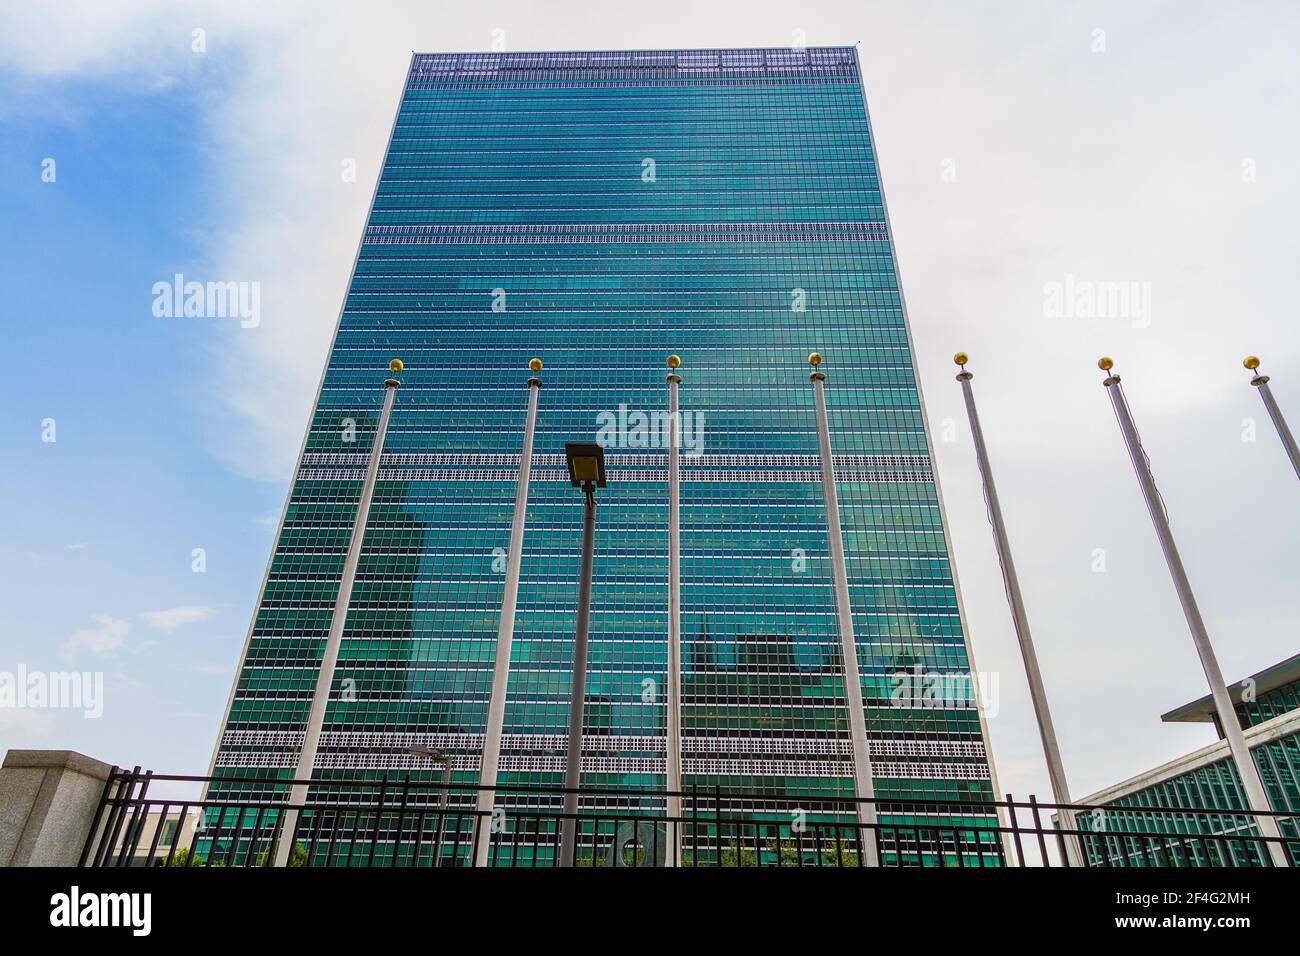 The front view of the headquarters of the United Nations Stock Photo